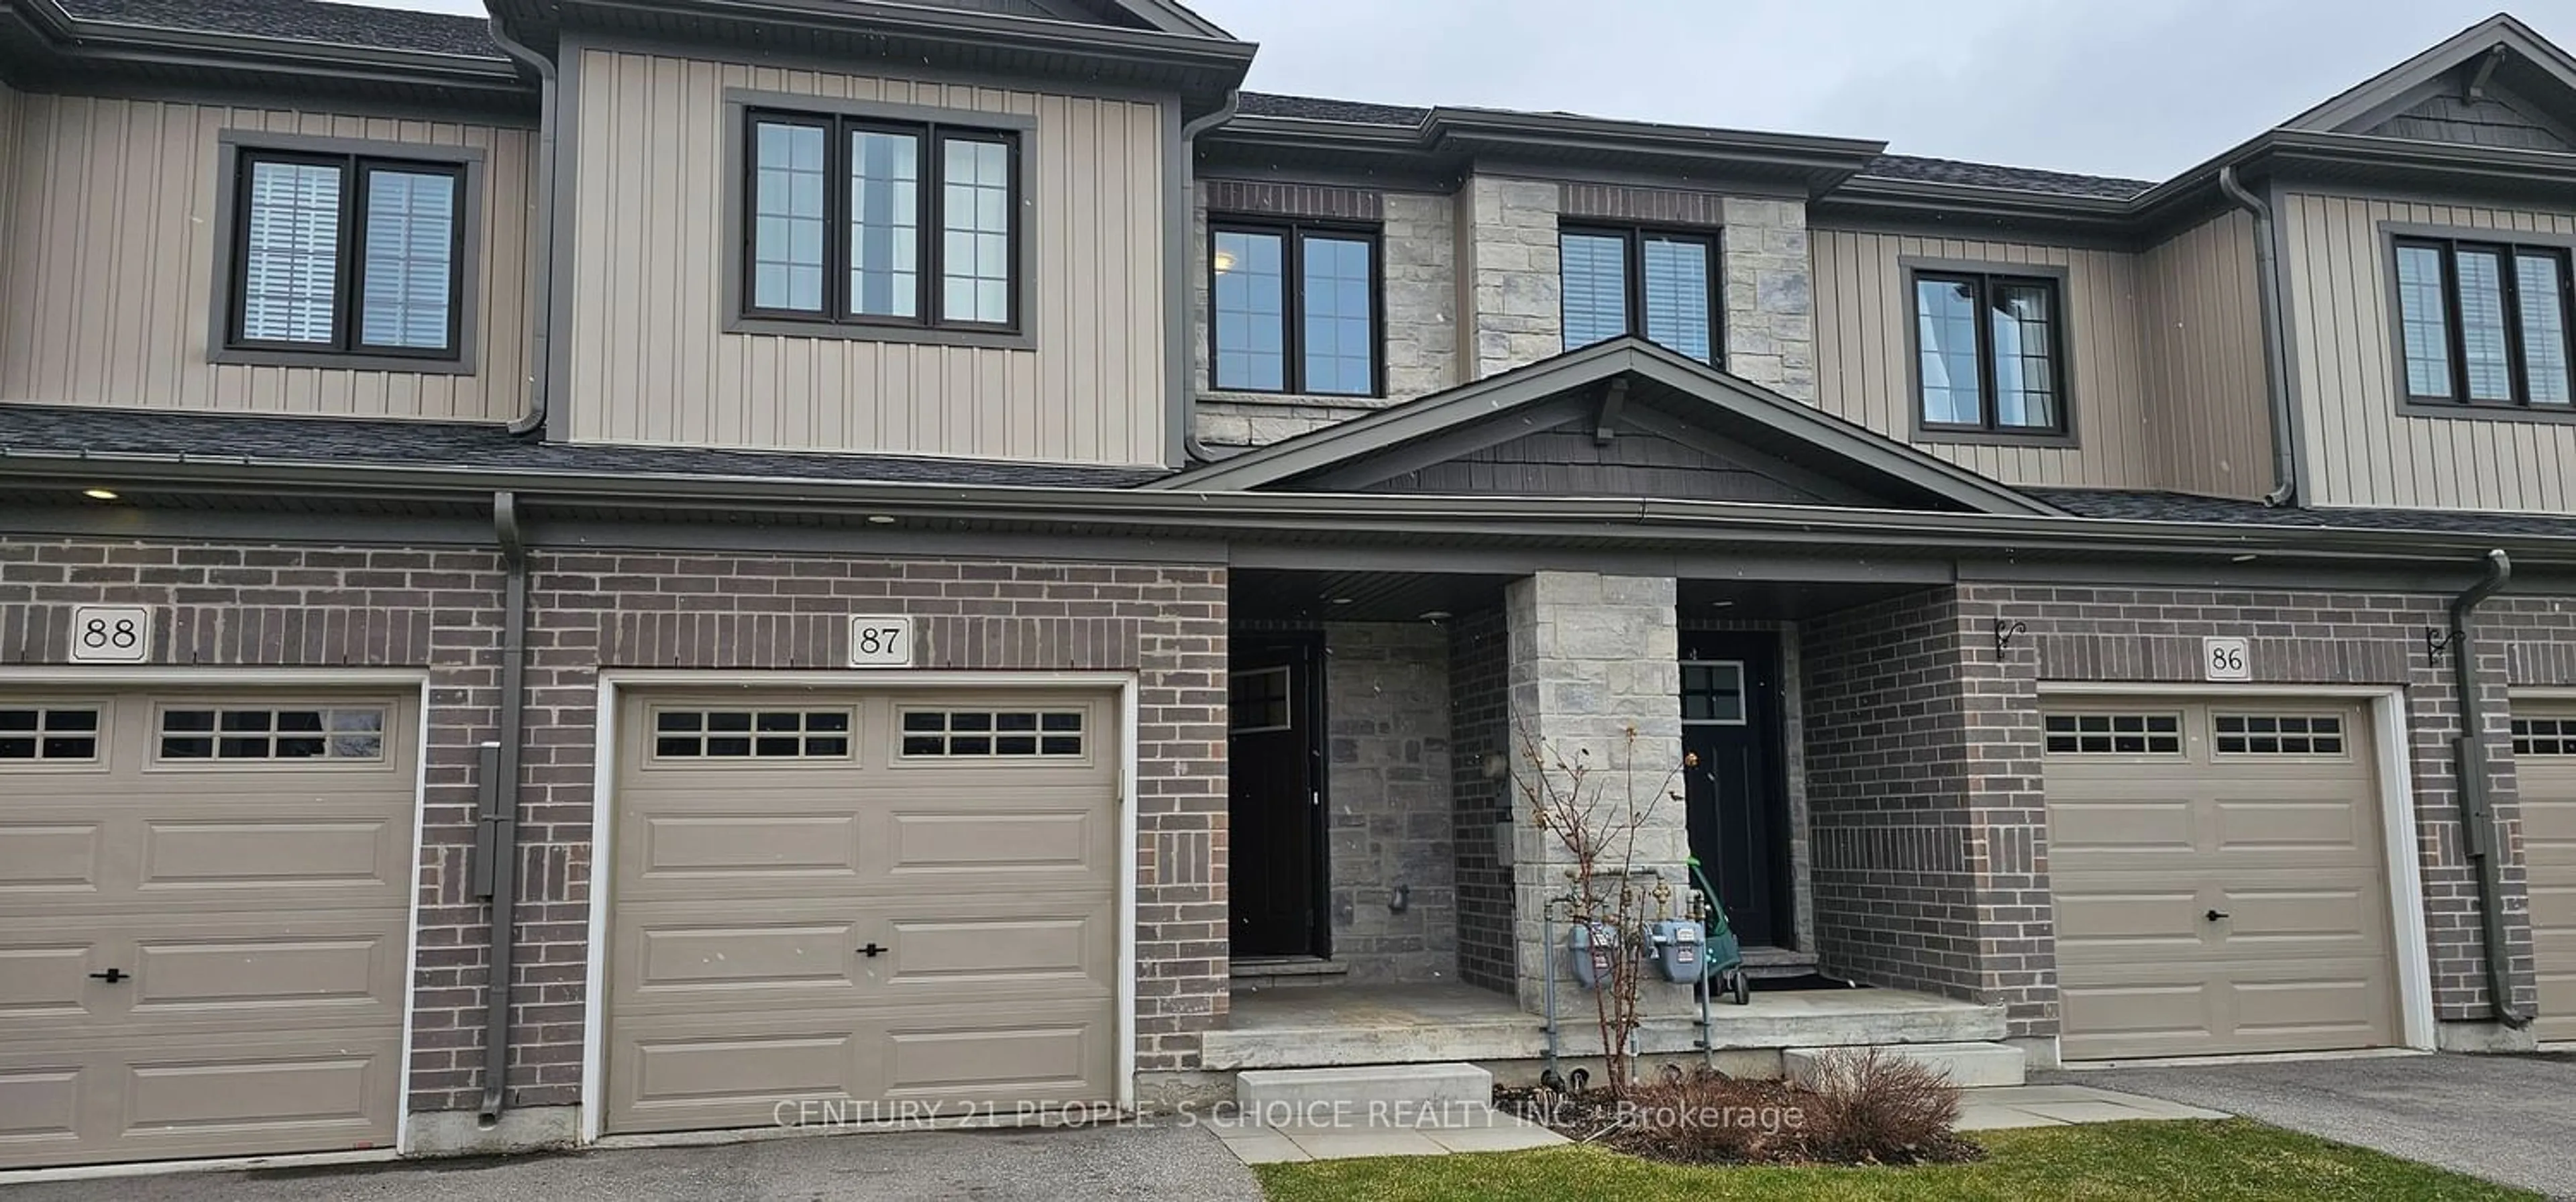 Home with stone exterior material for 135 Hardcastle Dr #87, Cambridge Ontario N1S 0B6